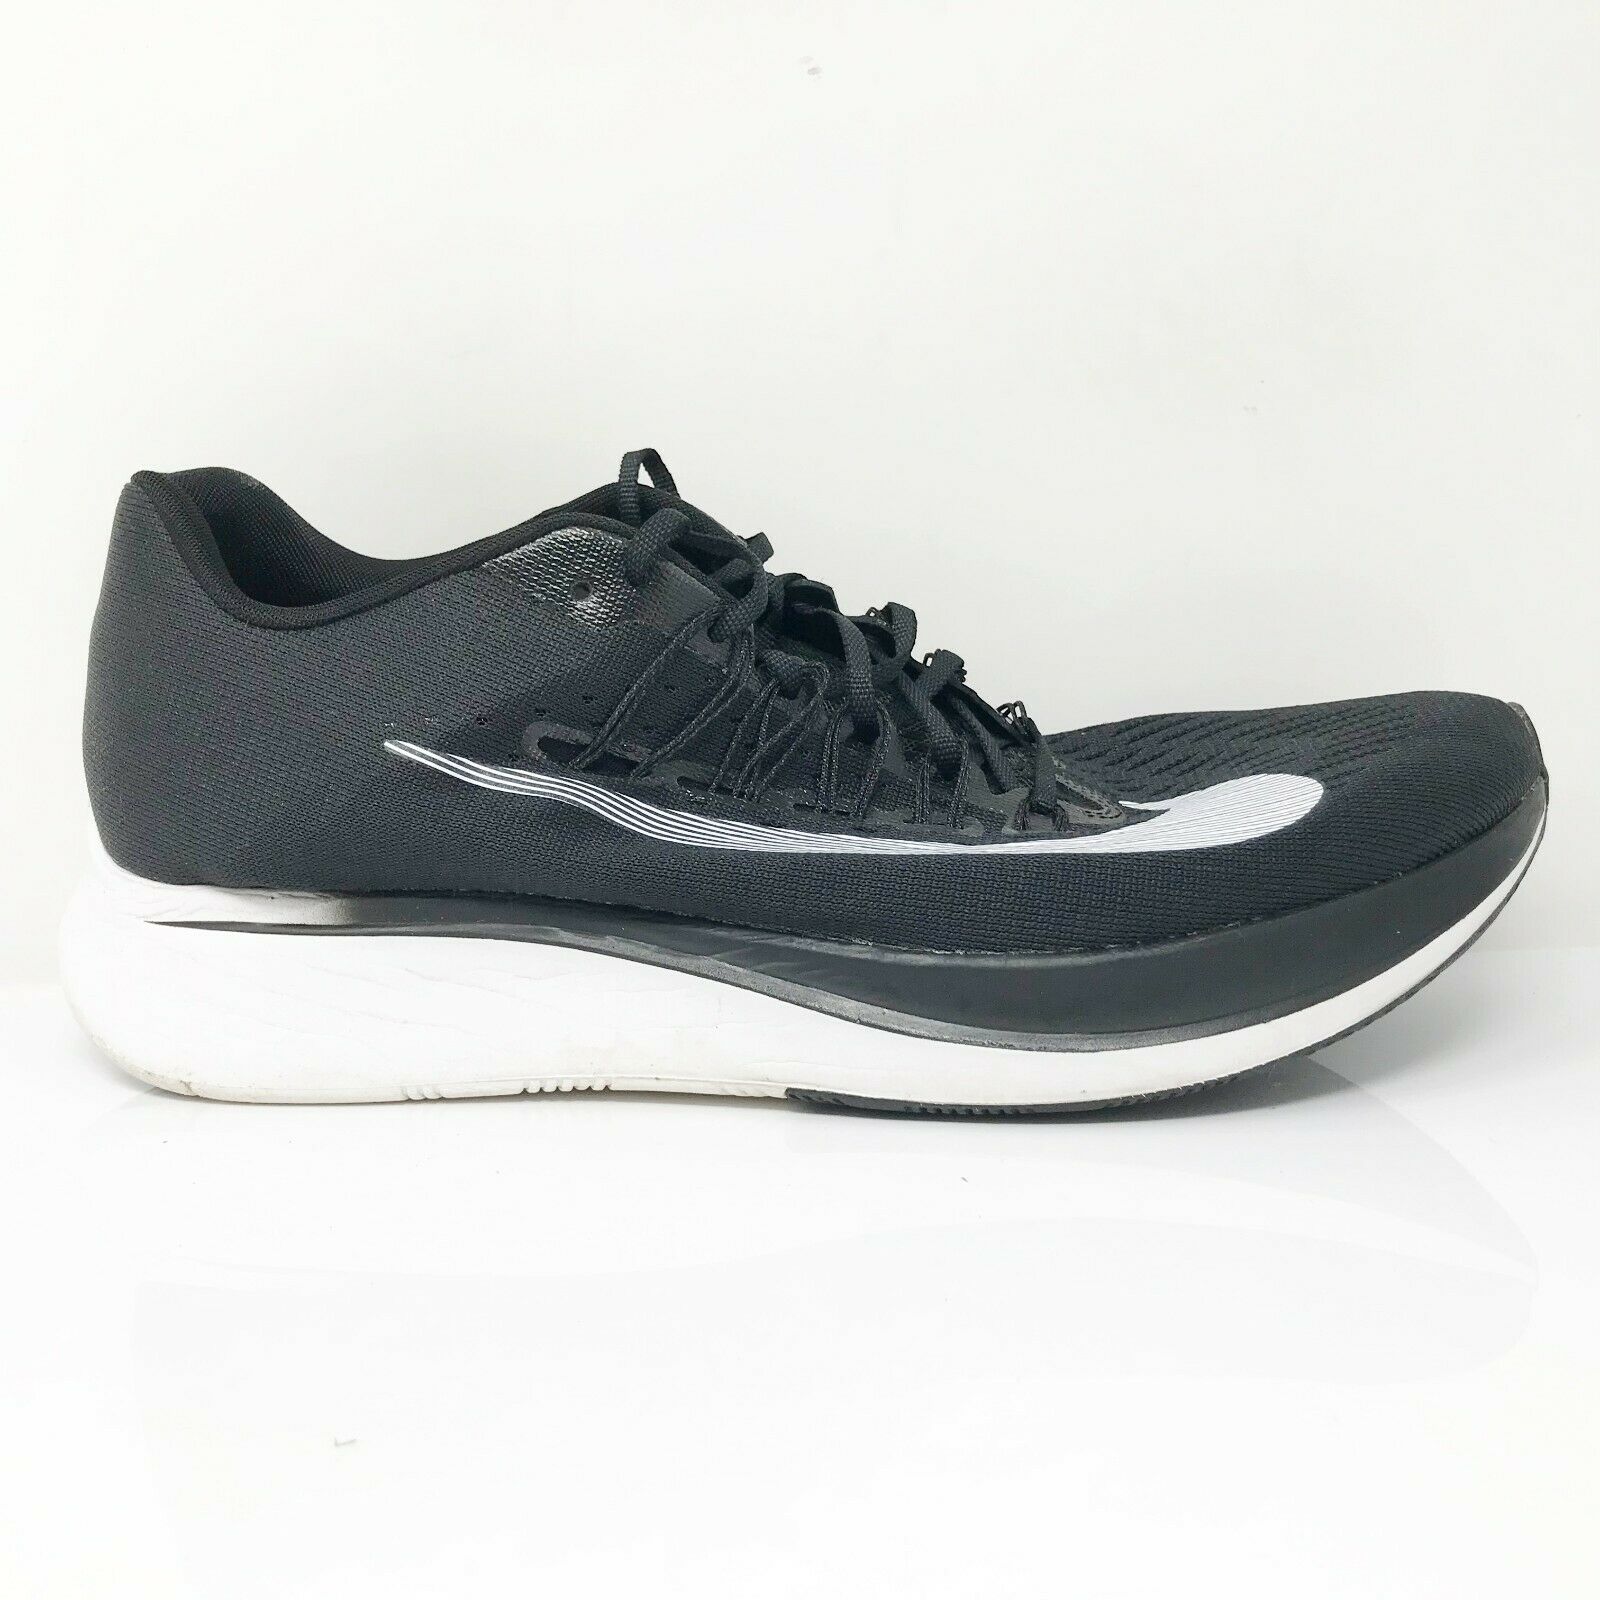 Nike Mens Zoom Fly 880848-001 Black Running Shoes Sneakers Size 11.5